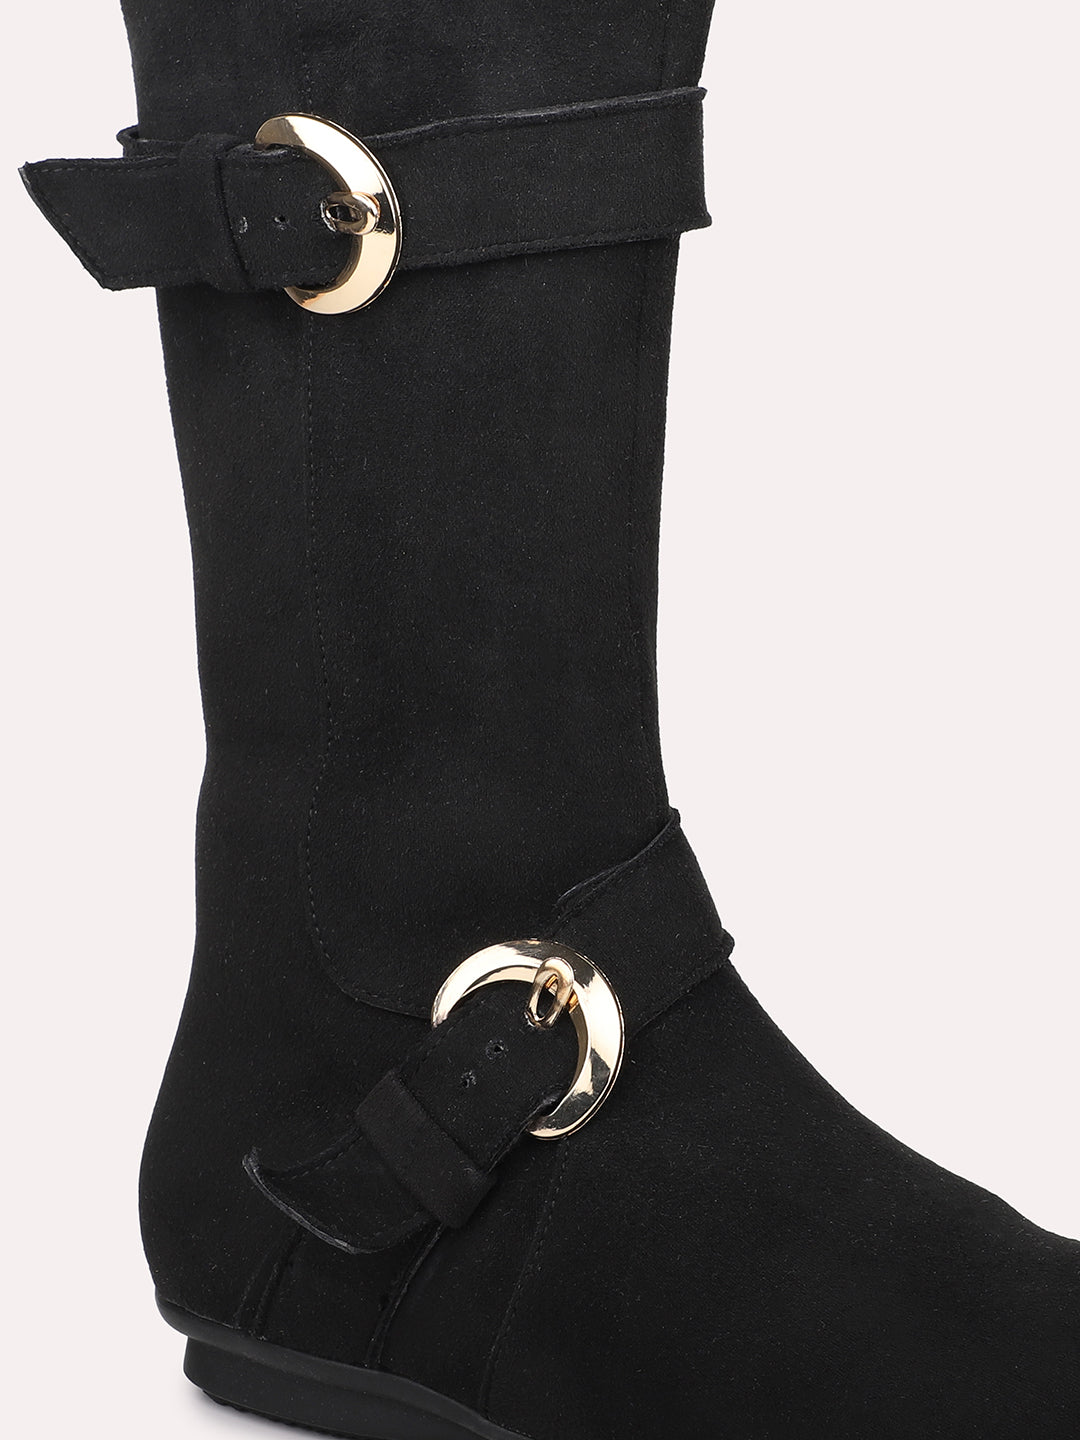 Women Black Knee High Boots With Buckle Detail